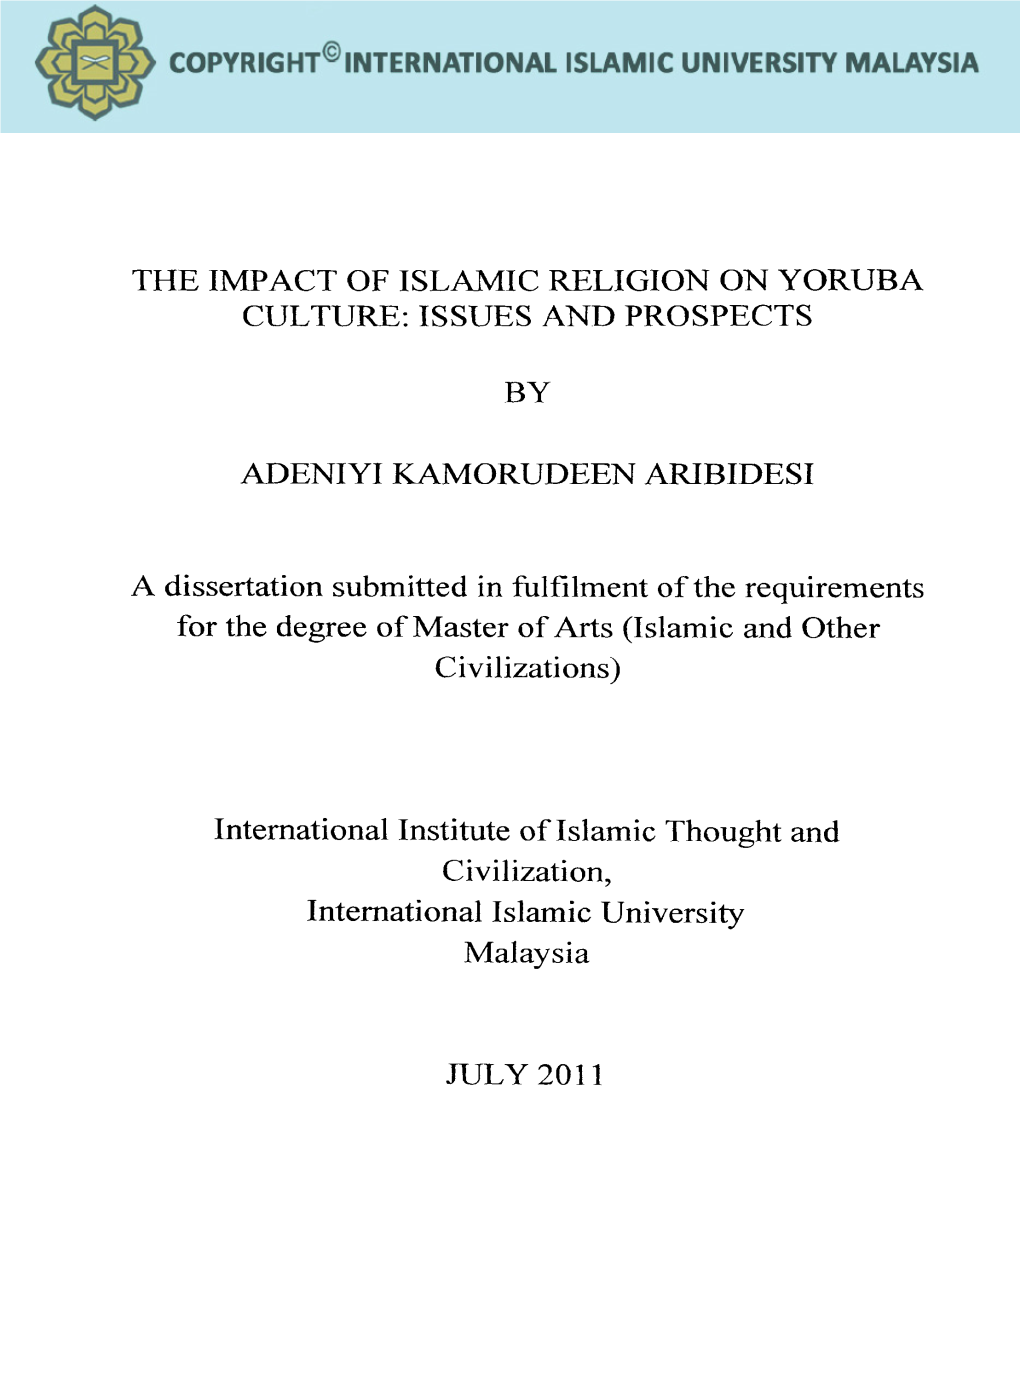 The Impact of Islamic Religion on Yoruba Culture: Issues and Prospects